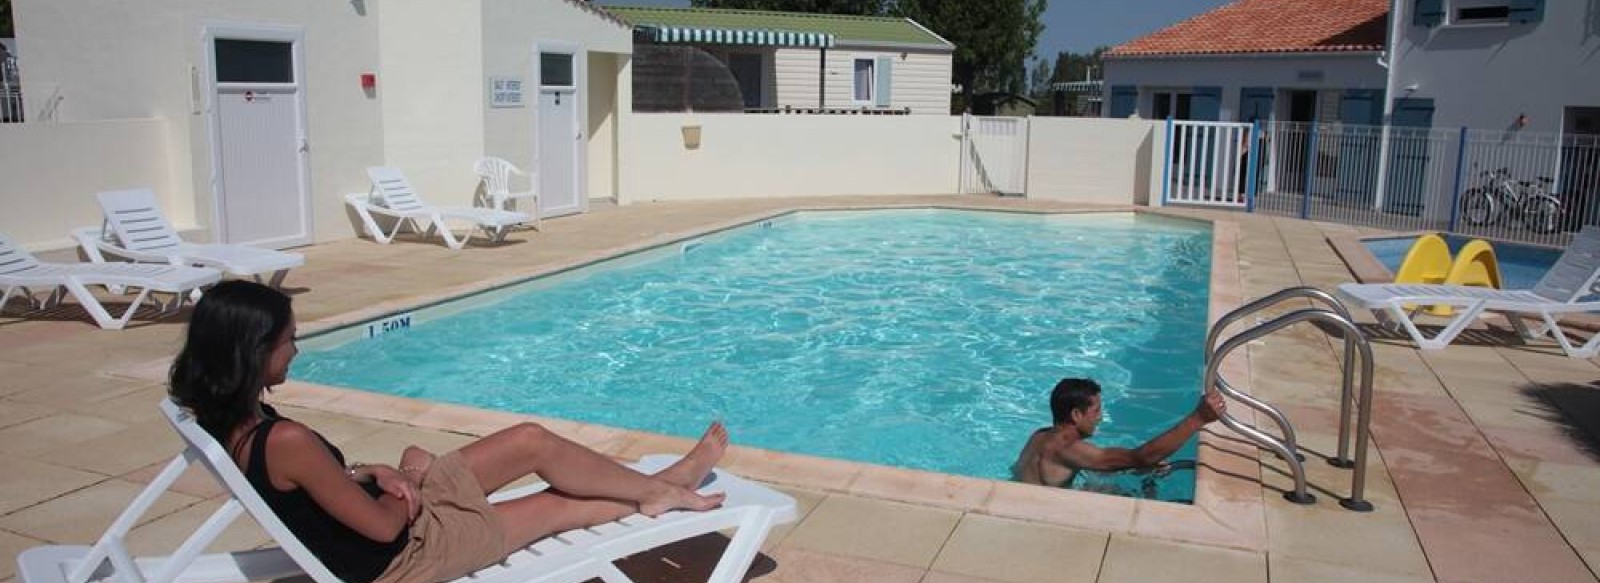 CAMPING LE LOGIS